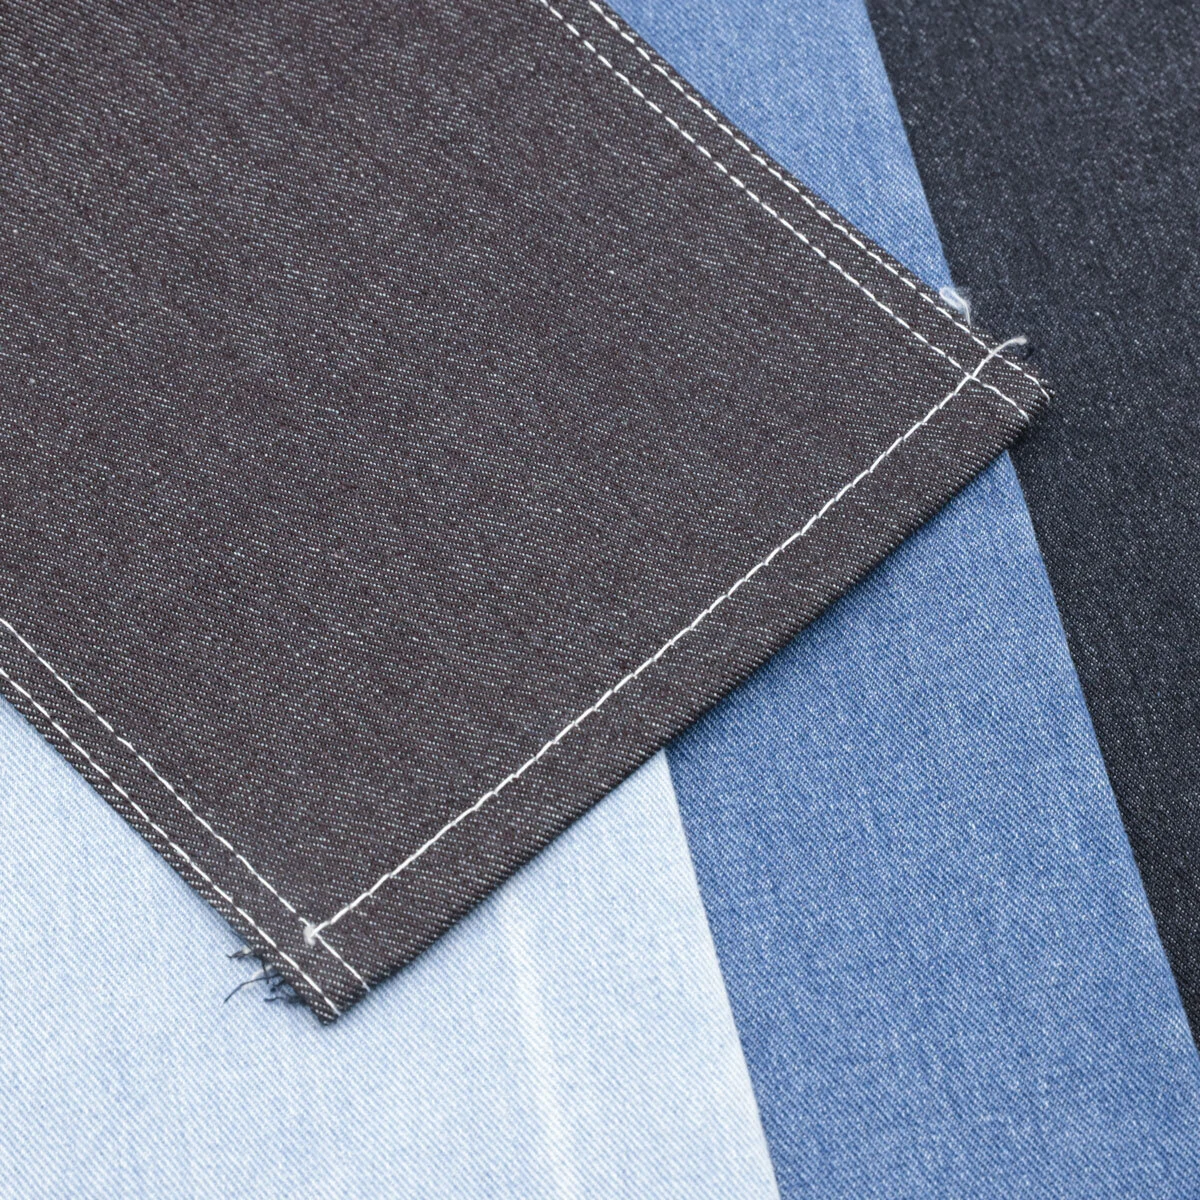 200C-4 Non- stretch Rolls of Denim Fabric for Jeans 6